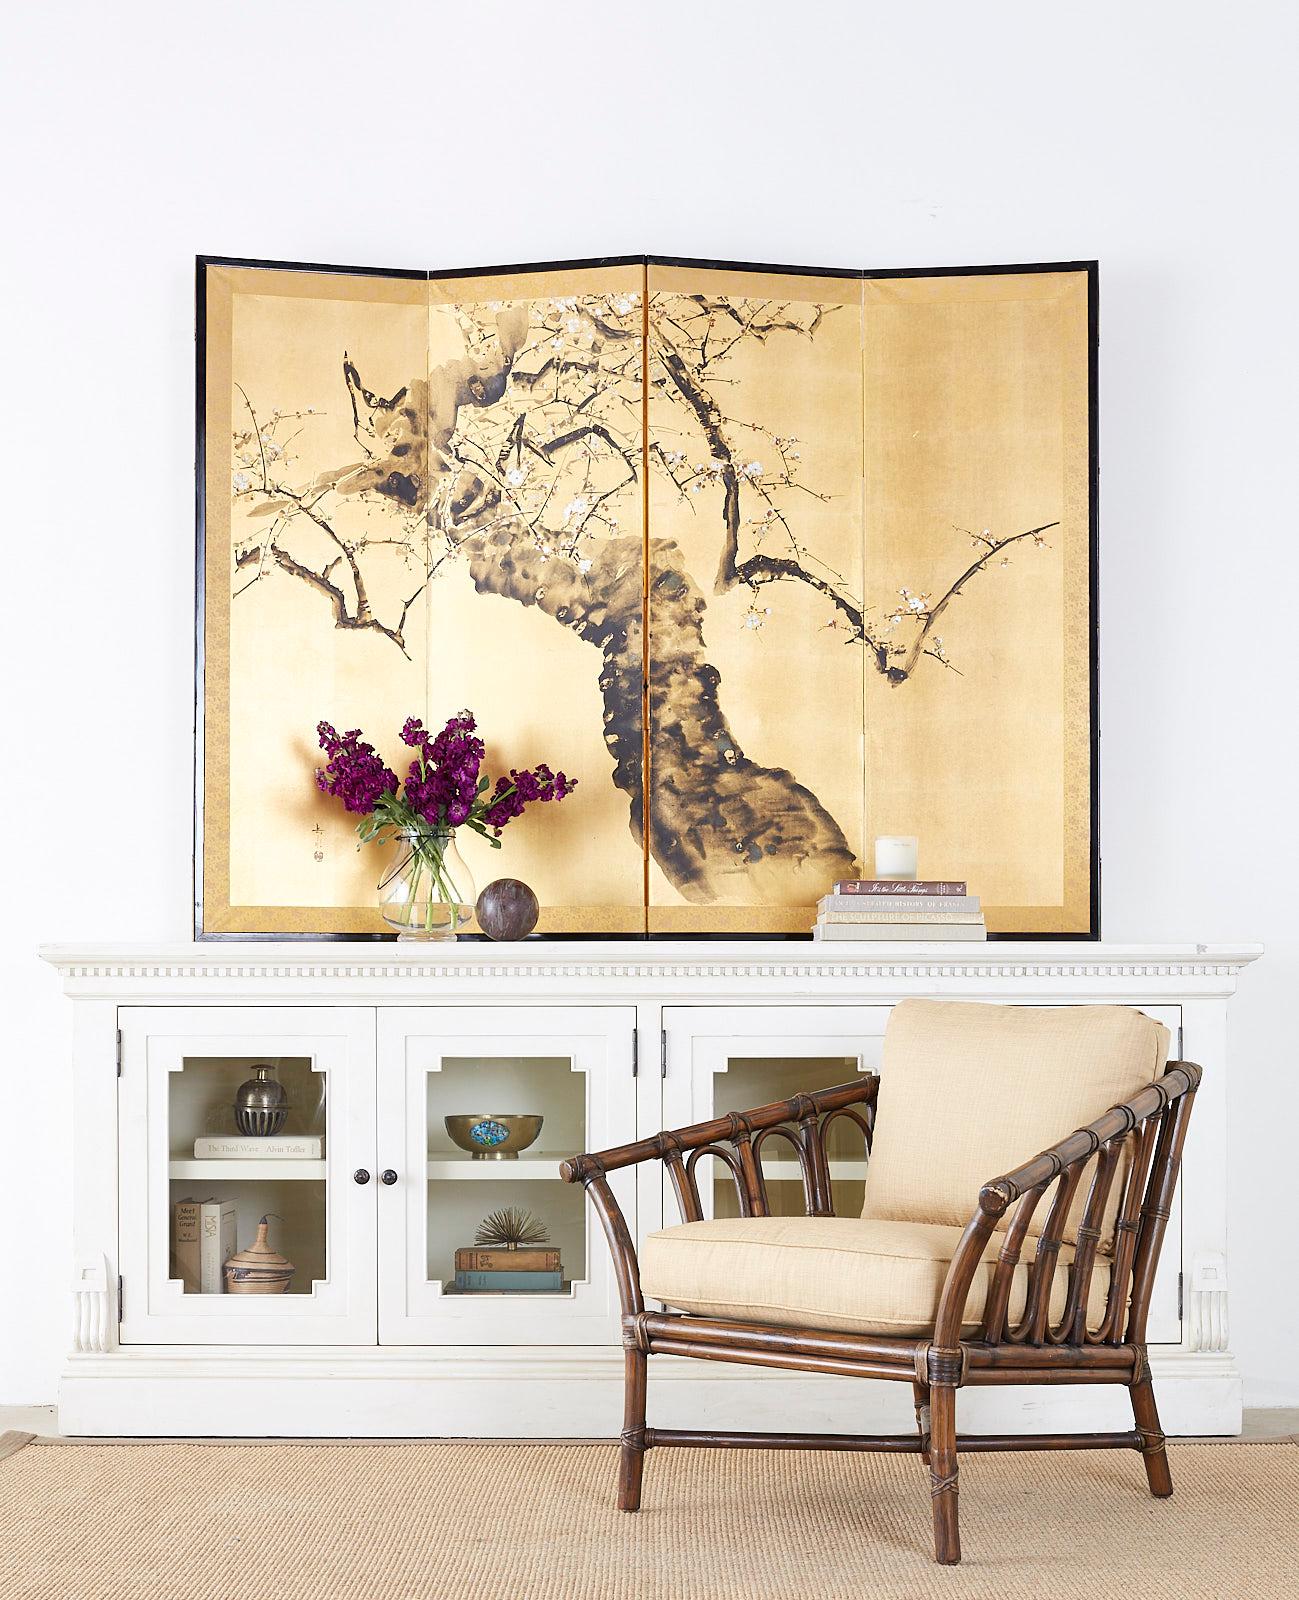 Impressive Japanese four panel screen depicting ancient flowering prunus tree with spring blossoms. Painted with ink and color pigments over gilt squares in the Nihonga school style. Signed by artist Gakusui with a seal on left side. Set in a